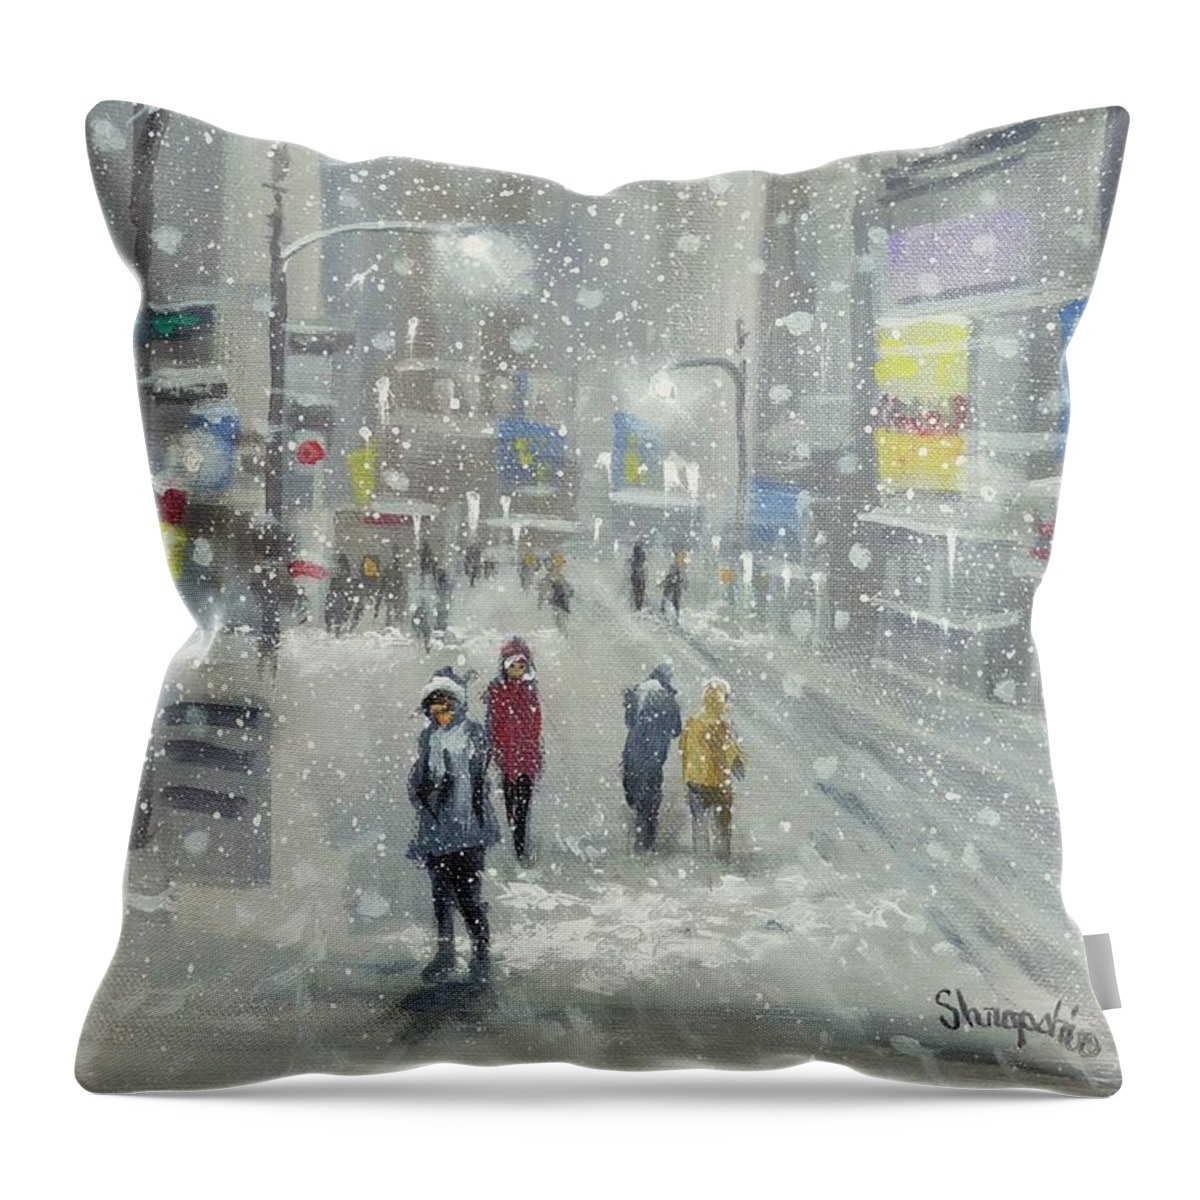 Falling Snow; New York; City Lights; Holiday Shoppers; Tom Shropshire Painting; Snowy Day; Cityscape; Urban Landscape; City Snow Throw Pillow featuring the painting Snowy Day by Tom Shropshire